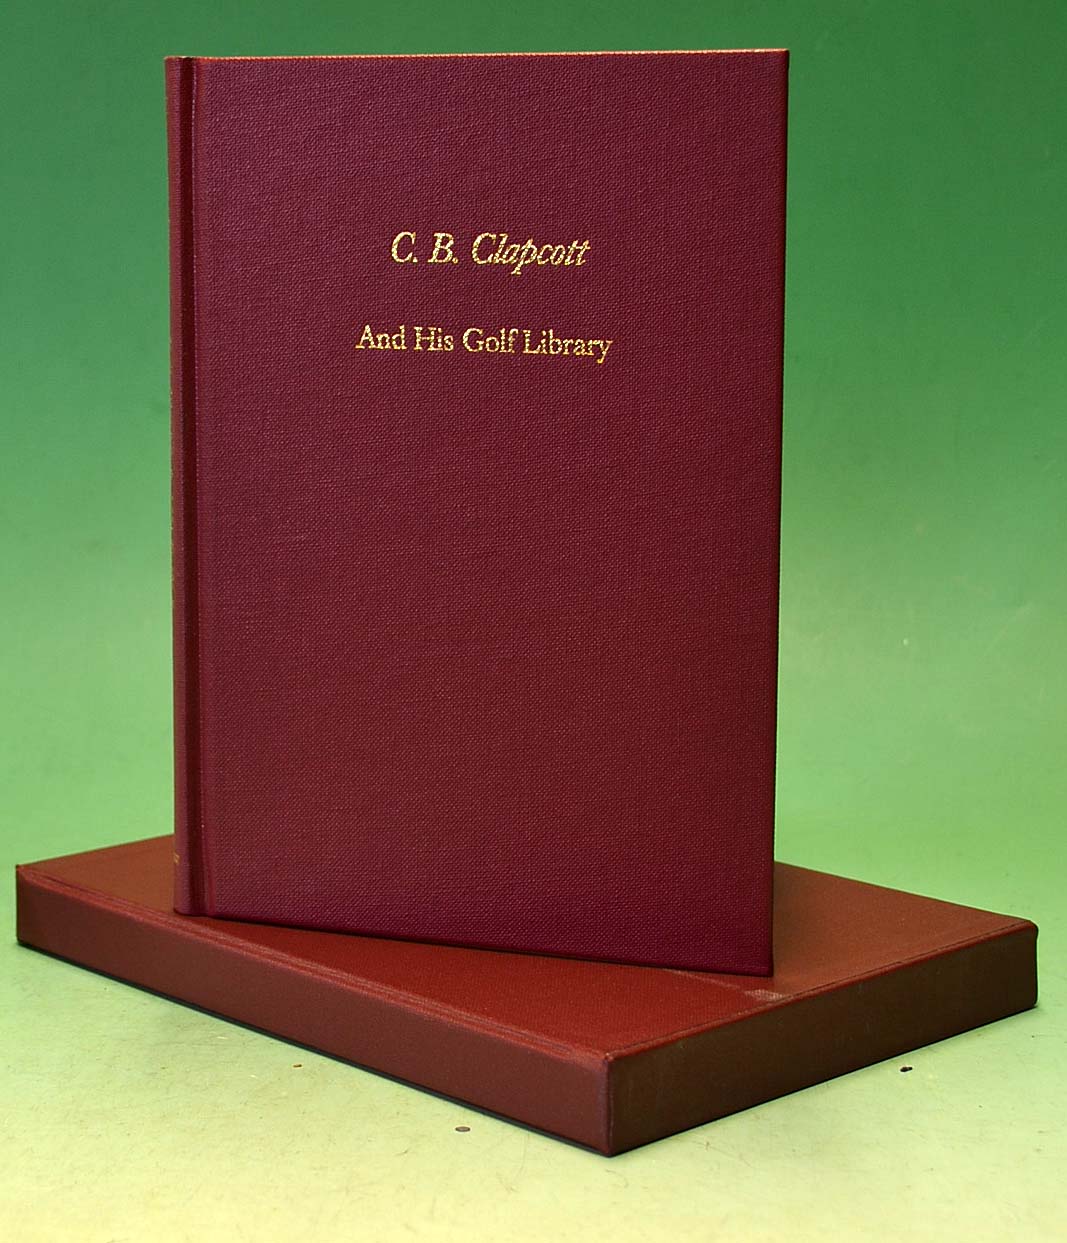 Johnston, Alistair J and Murdoch, Joseph S.F. signed -"C. B. Clapcott and His Golf Library"